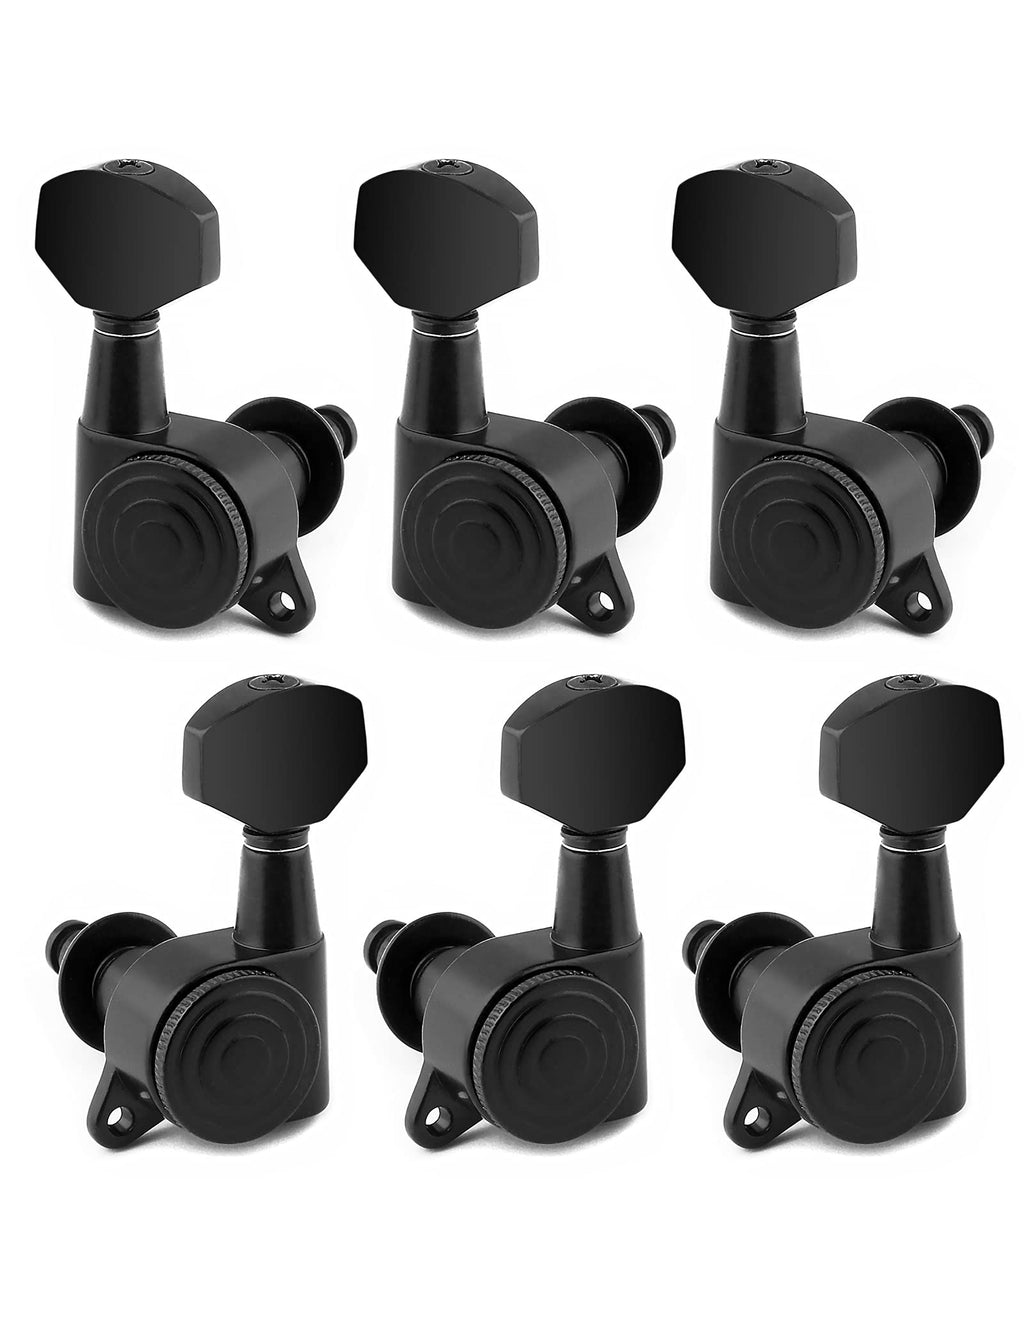 Bogart Locking Guitar String Tuning Pegs Sealed Machine Heads Tuners Tuning Keys 3 Left 3 Right for Electric Guitar or Acoustic Guitar Black.